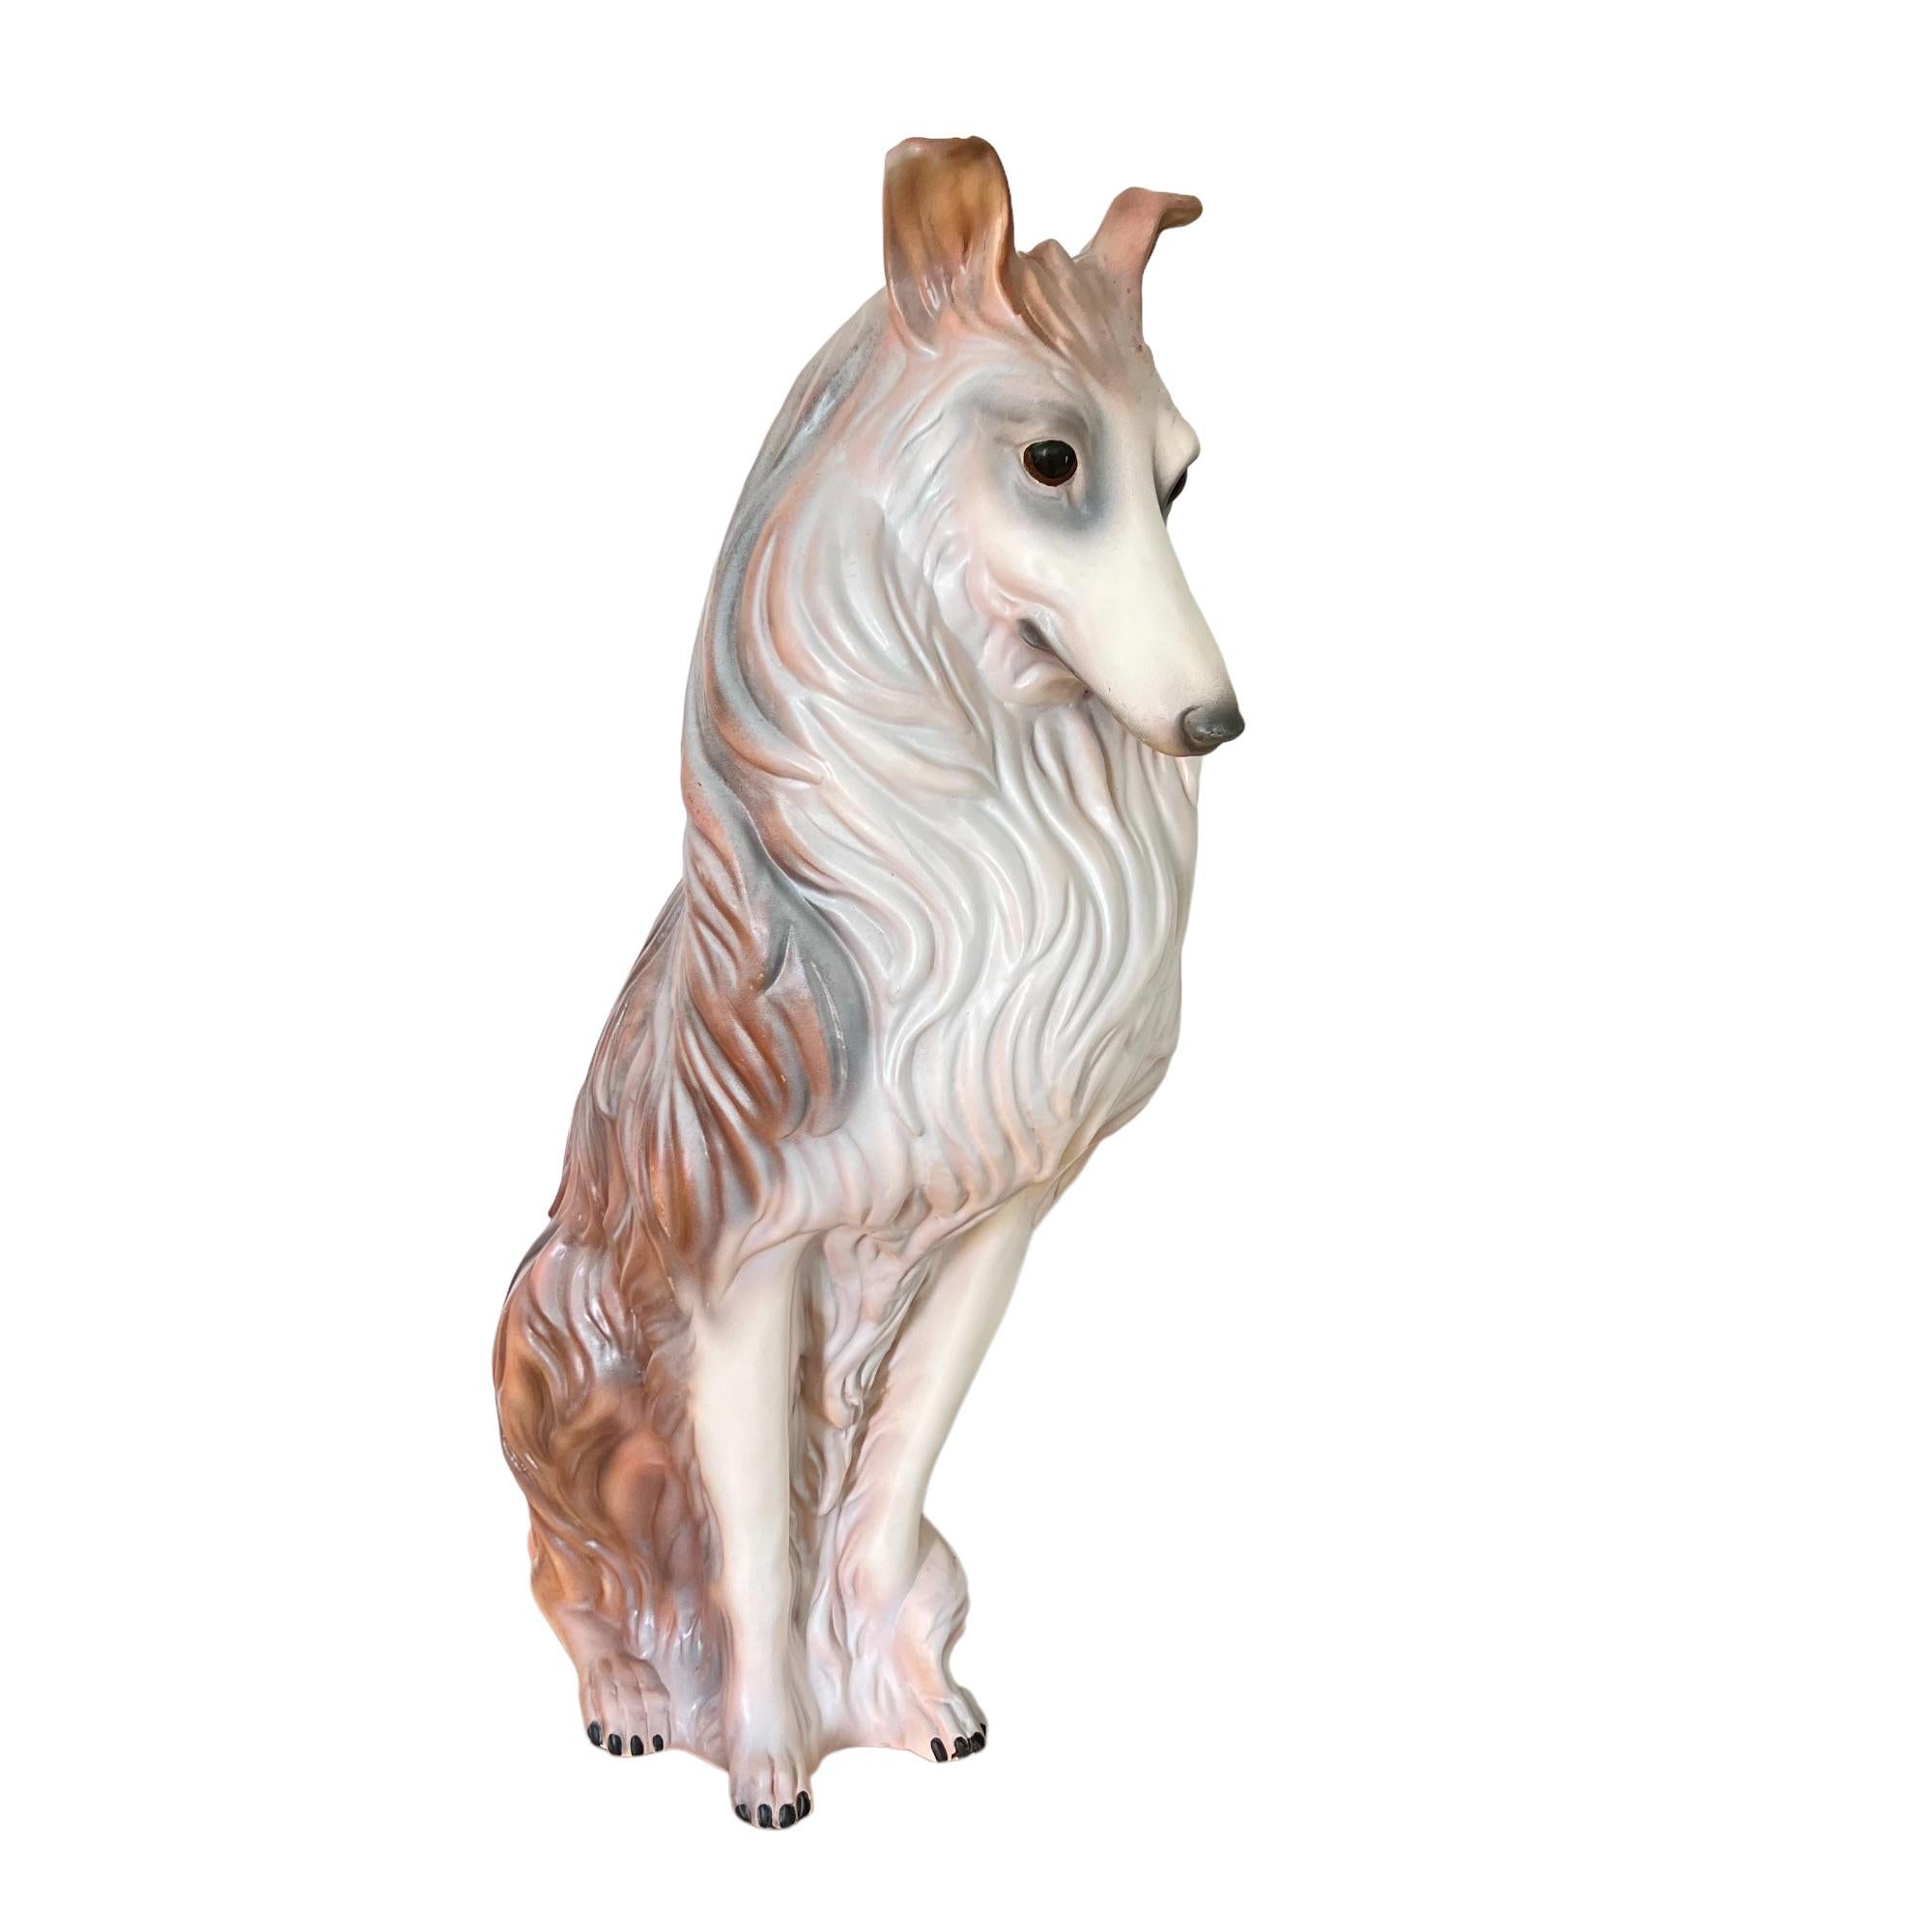 Glazed Mid 20th Century Large Scale Terracotta Collie Dog Statue